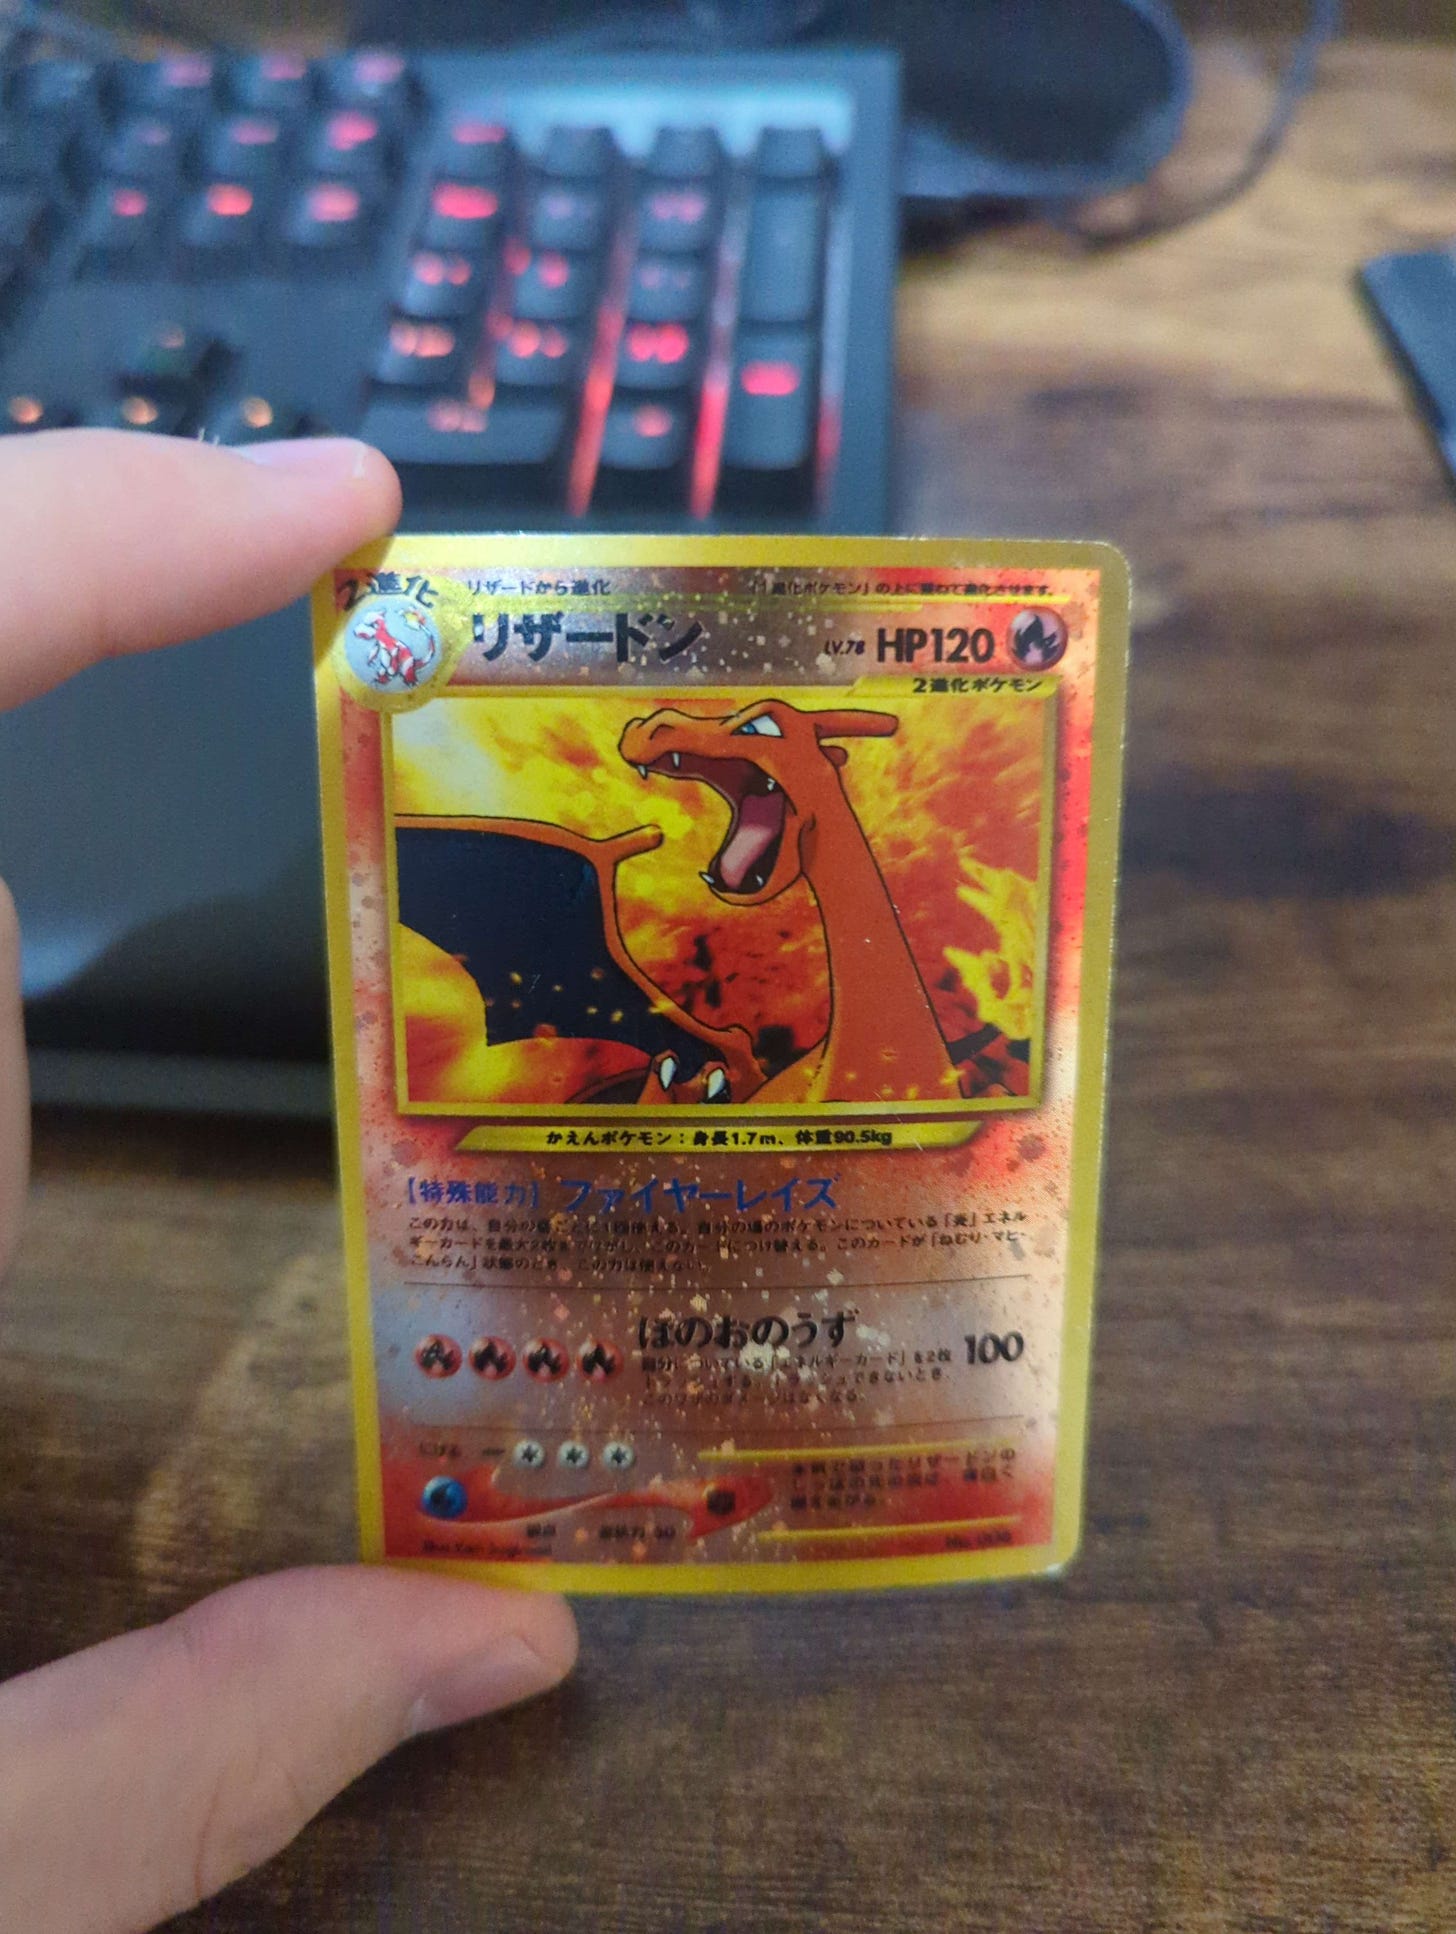 A photograph of Aiden’s Japanese Charizard card, from Neo Premium File 2, released in July 2000 (followed by a general release in August 2000)